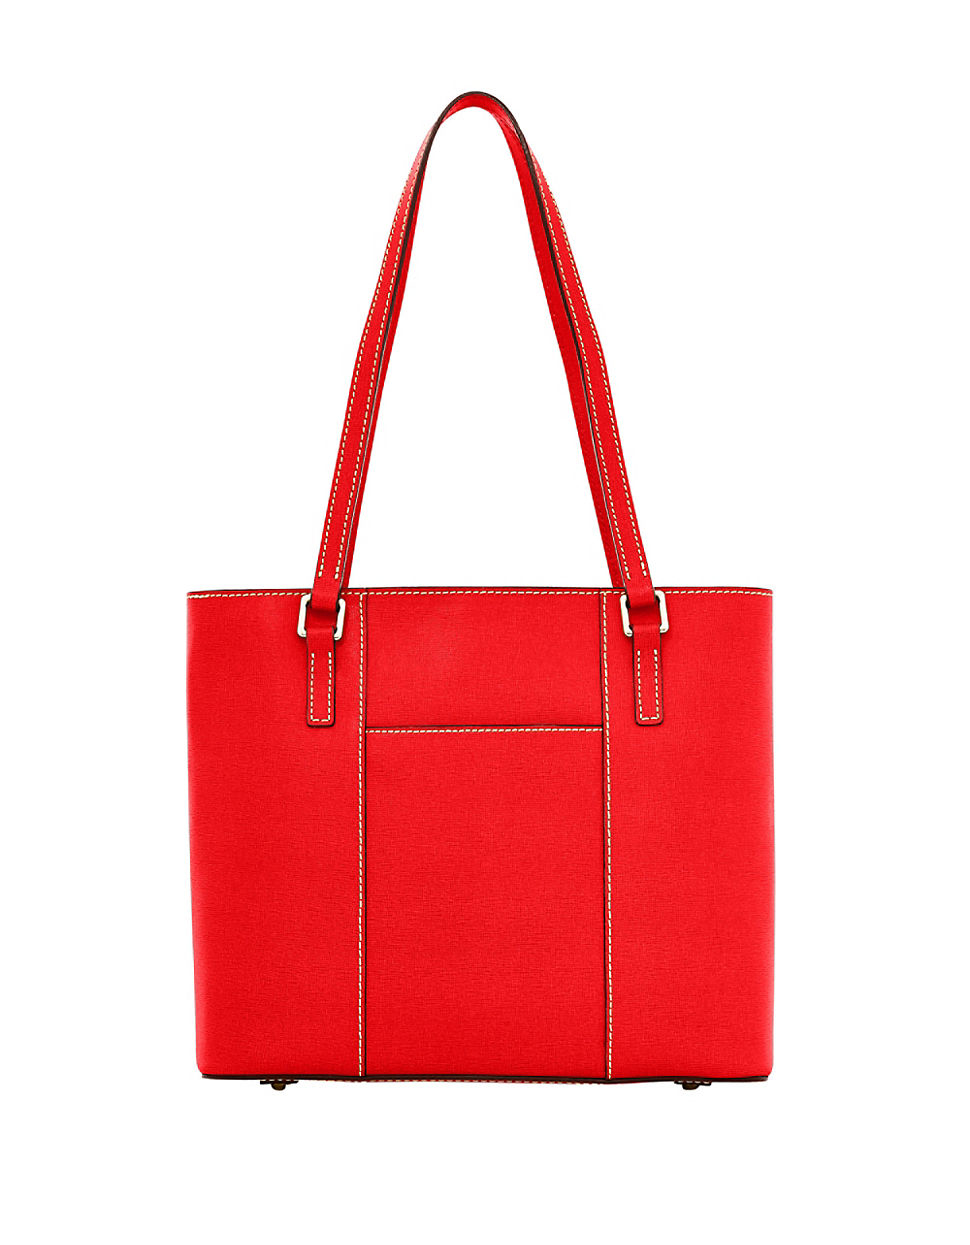 Dooney & bourke Lexington Saffiano Leather Tote in Red | Lyst